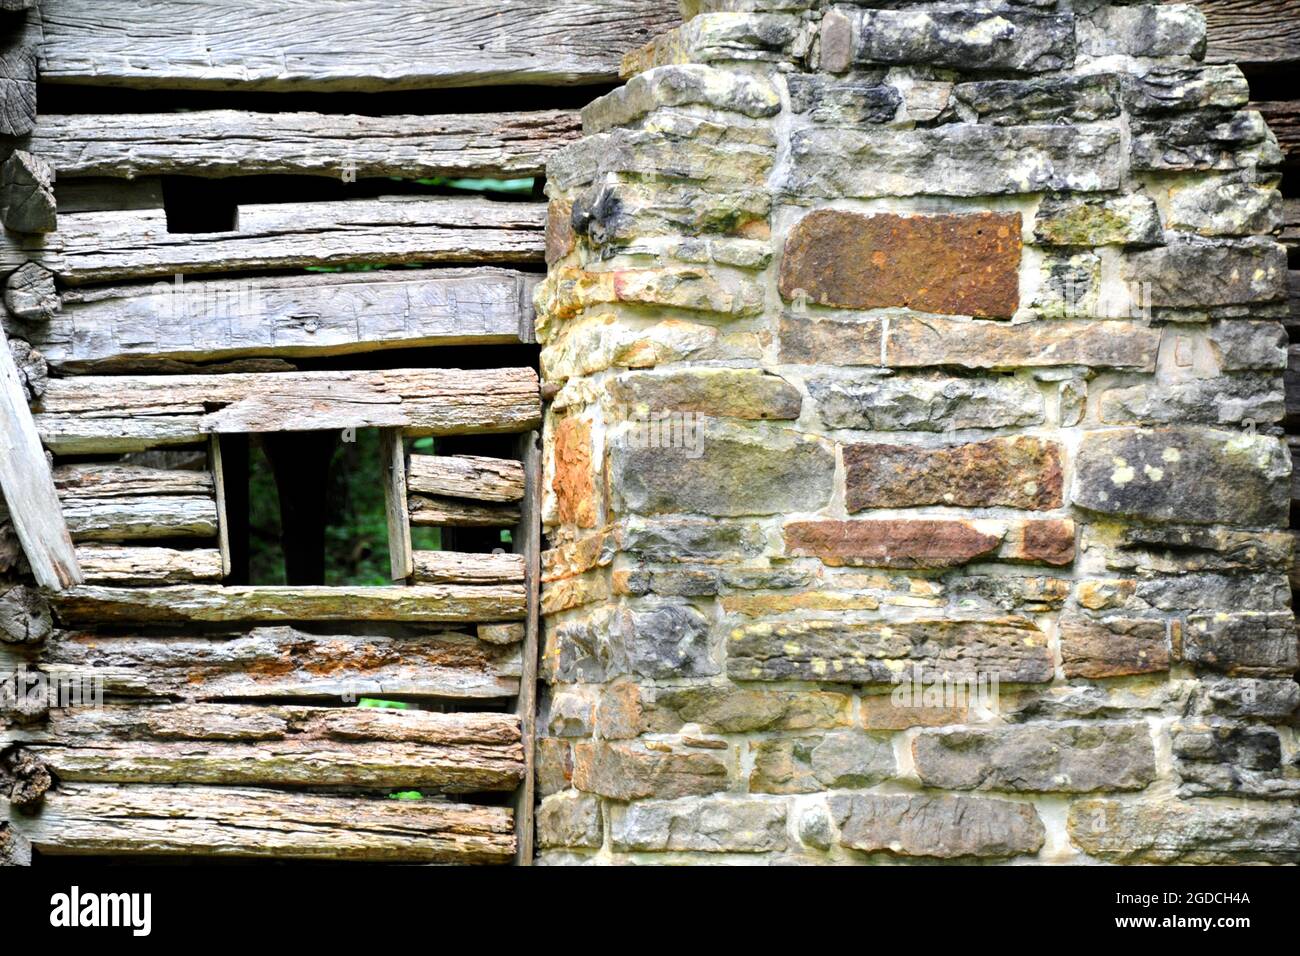 Background image shows wall of the historic Villines Cabin in the historic area of Boxley Valley in Arkansas.  Cabin has hand hewn logs and stone chim Stock Photo